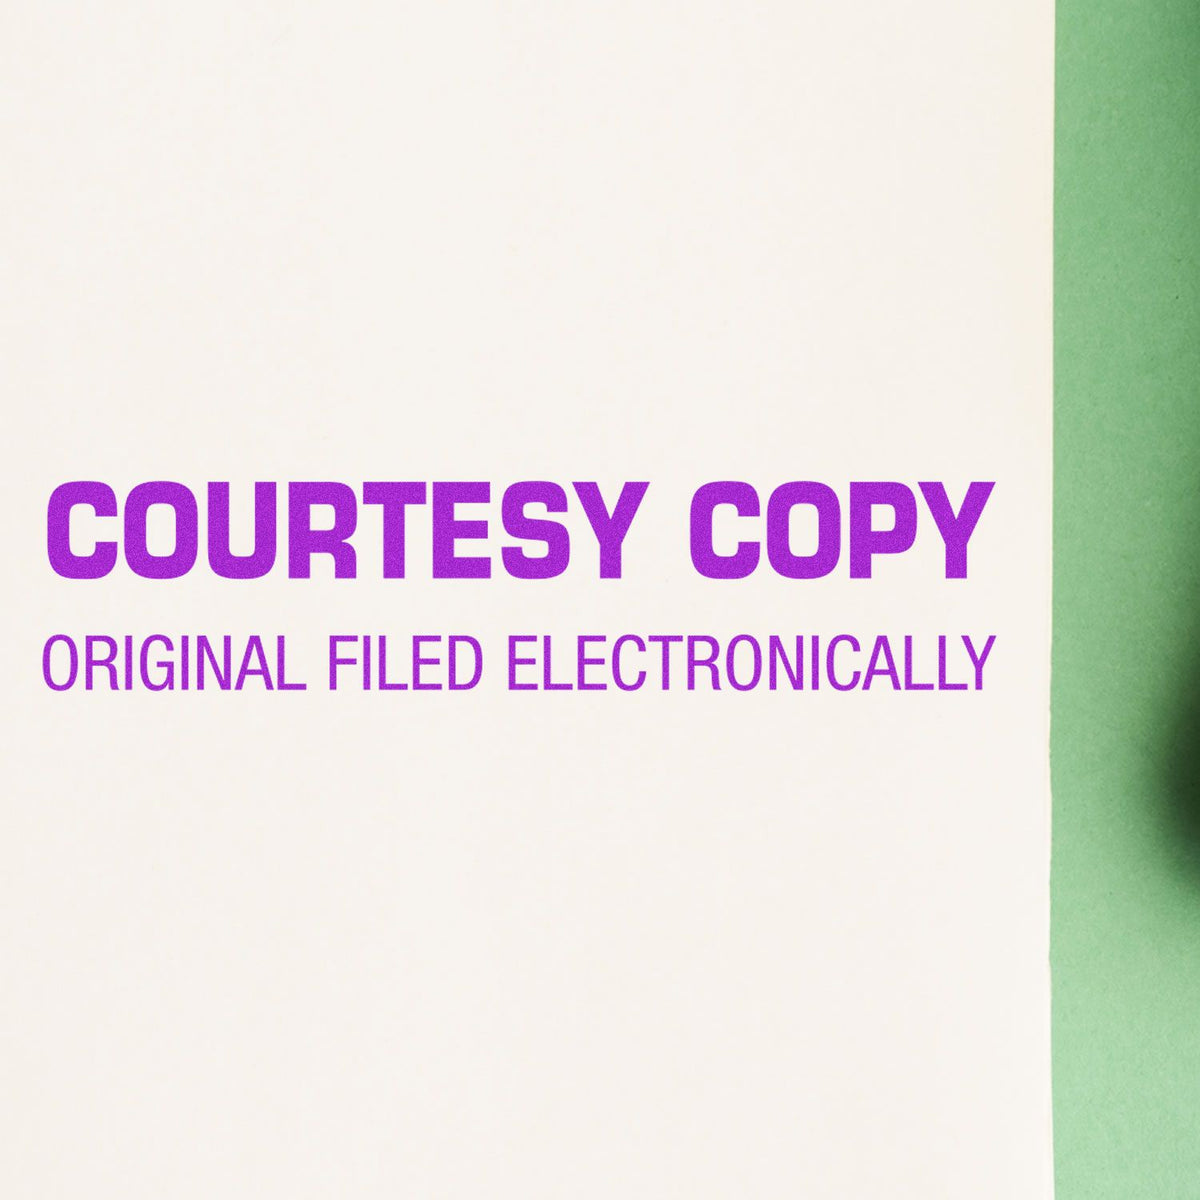 Large Self-Inking Courtesy Copy Original Filed Electronically Stamp In Use